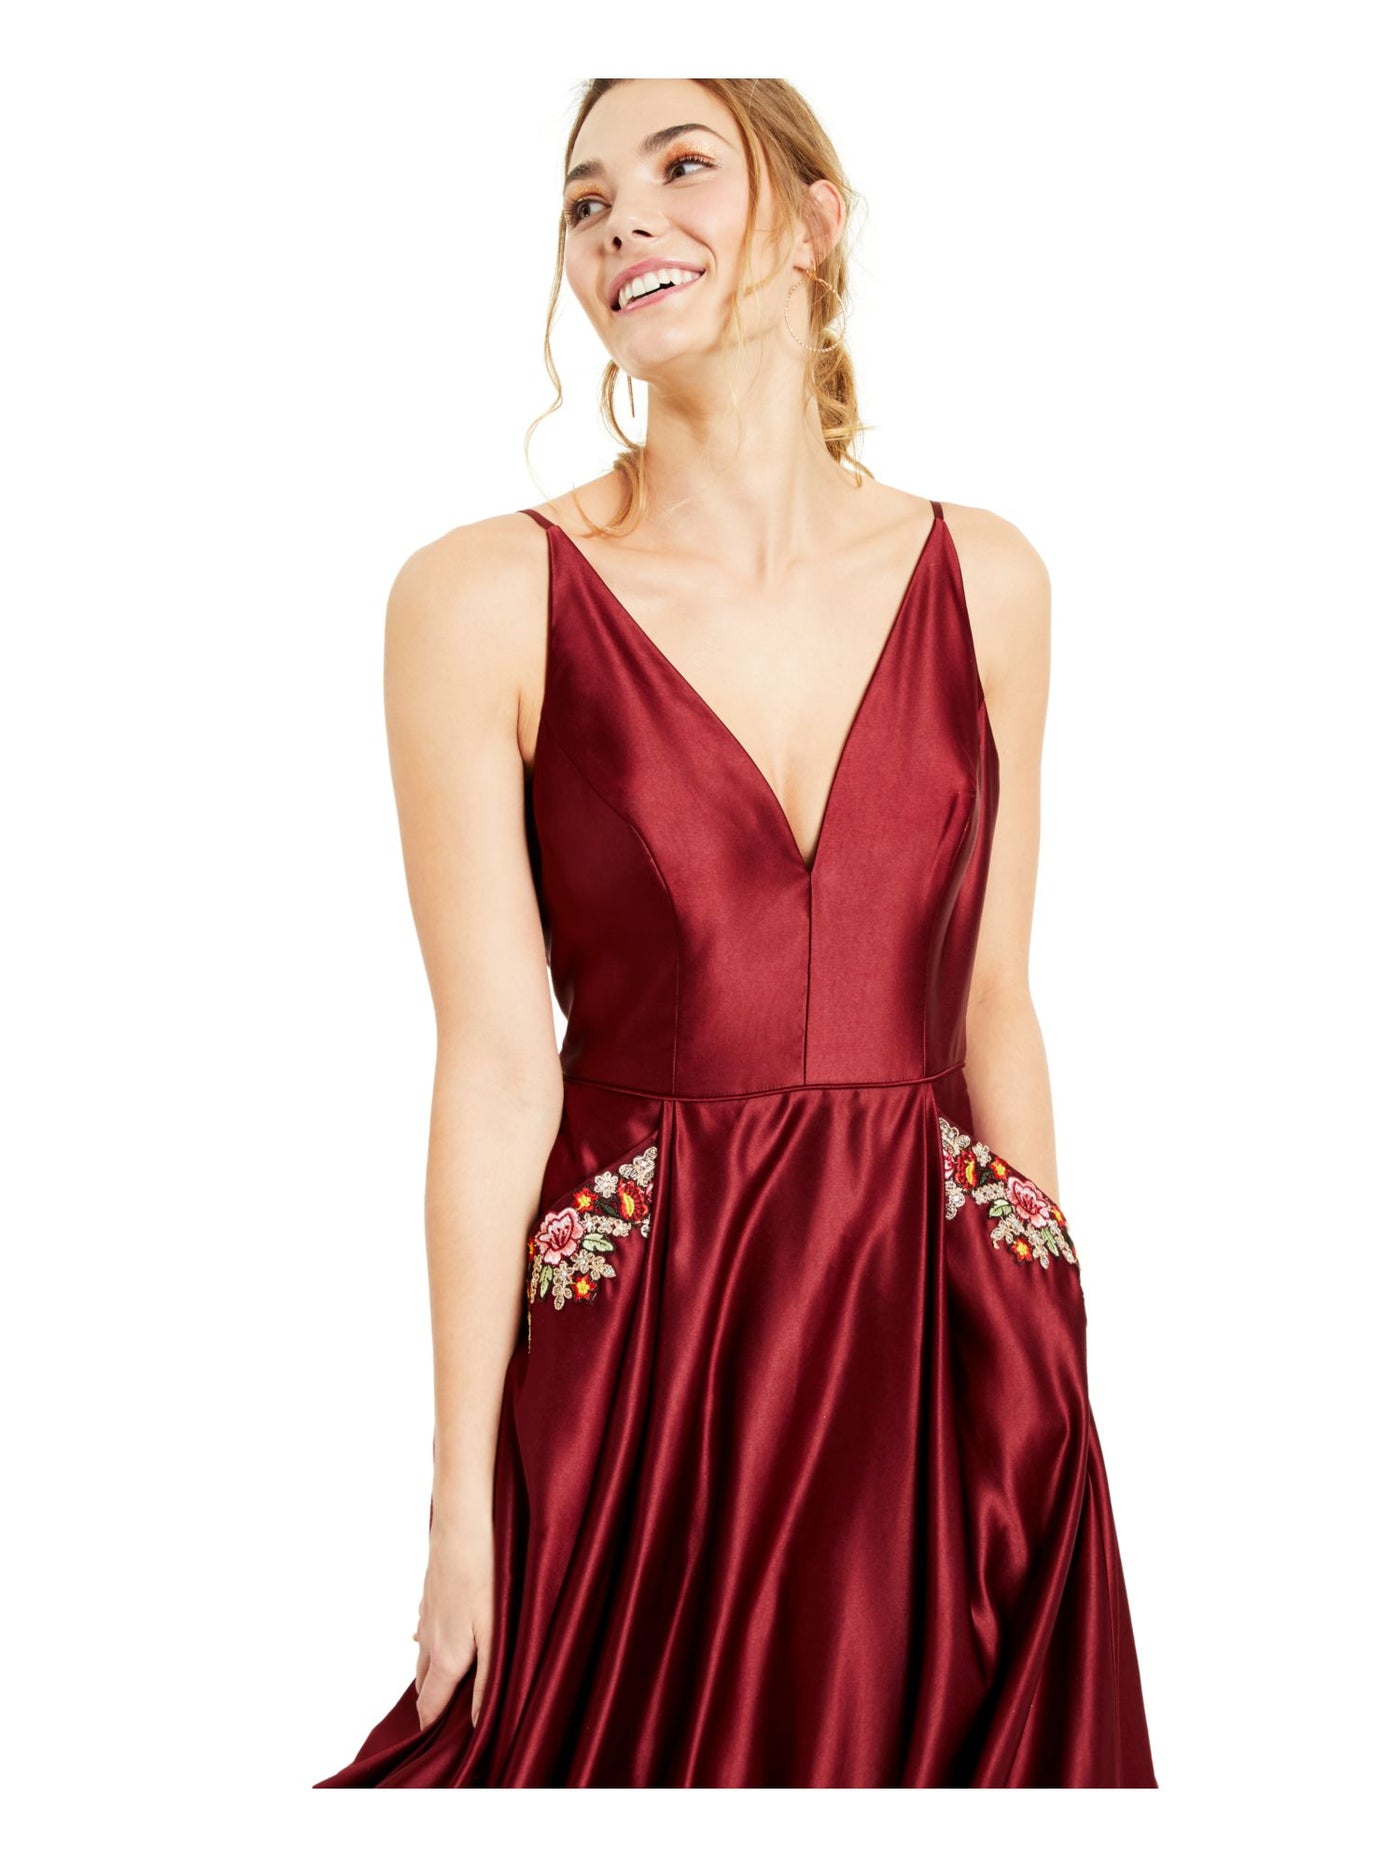 BLONDIE Womens Maroon Embellished Pocketed Satin Ballgown Spaghetti Strap V Neck Full-Length Formal A-Line Dress Juniors 5